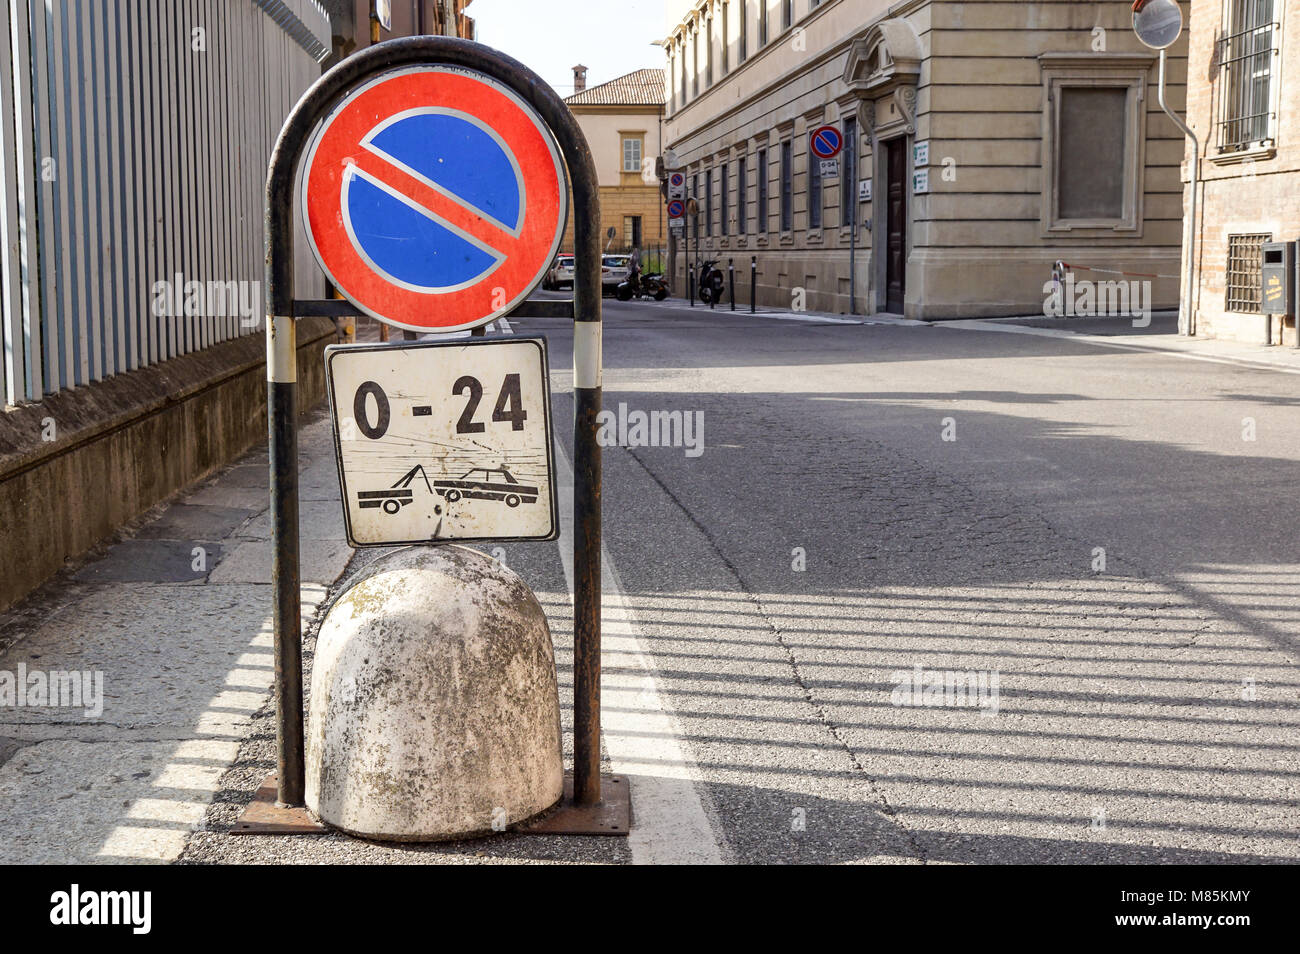 No Stopping sign on he road in the urban city center Stock Photo